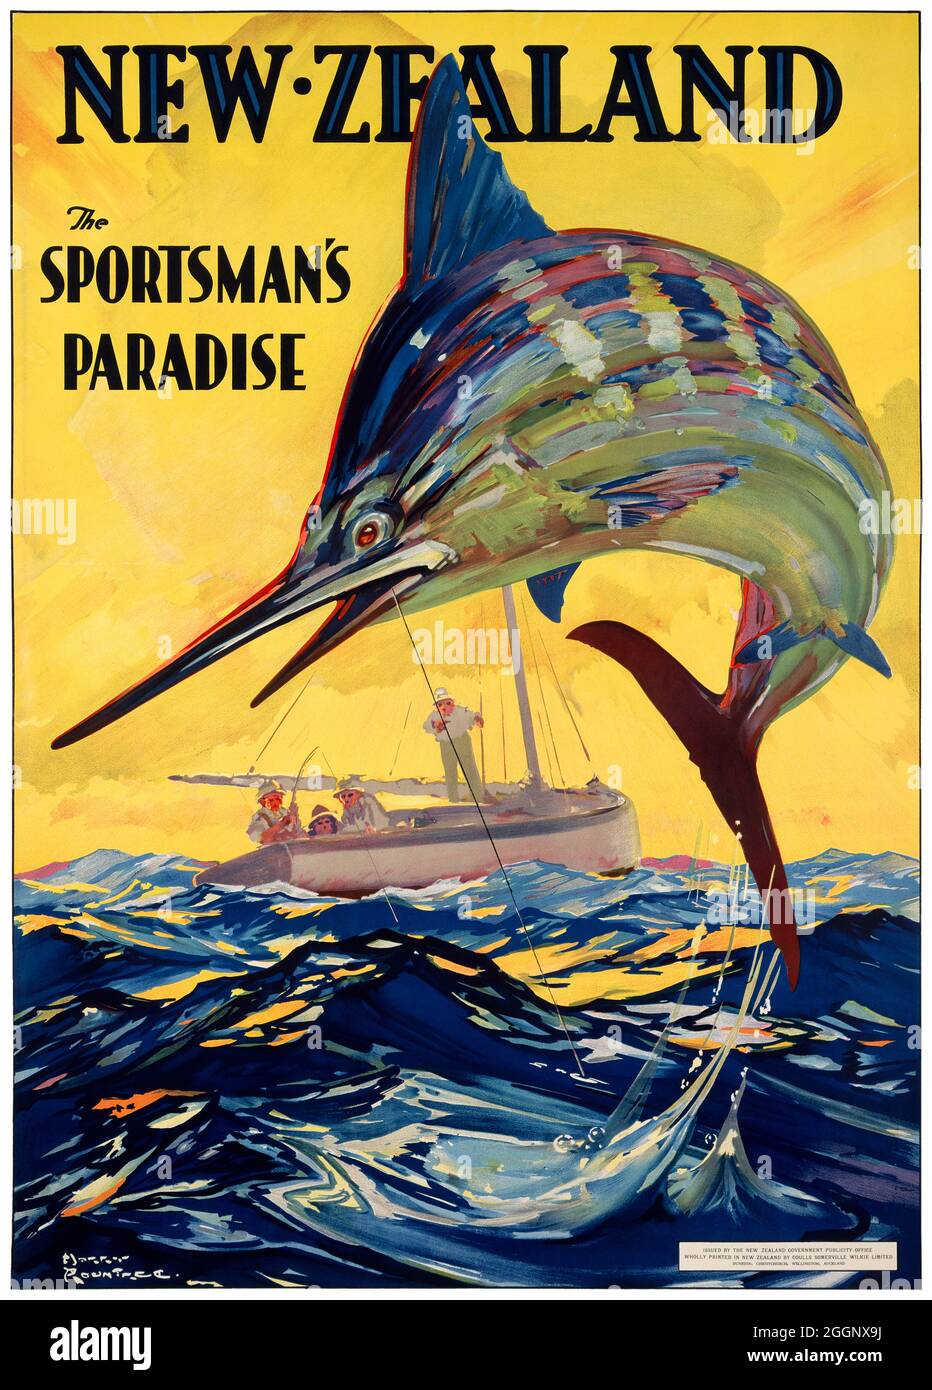 New Zealand. The Sportsman's Paradise by Harry Rountree (1878-1950). Restored vintage poster published in 1929 in New Zealand. Stock Photo